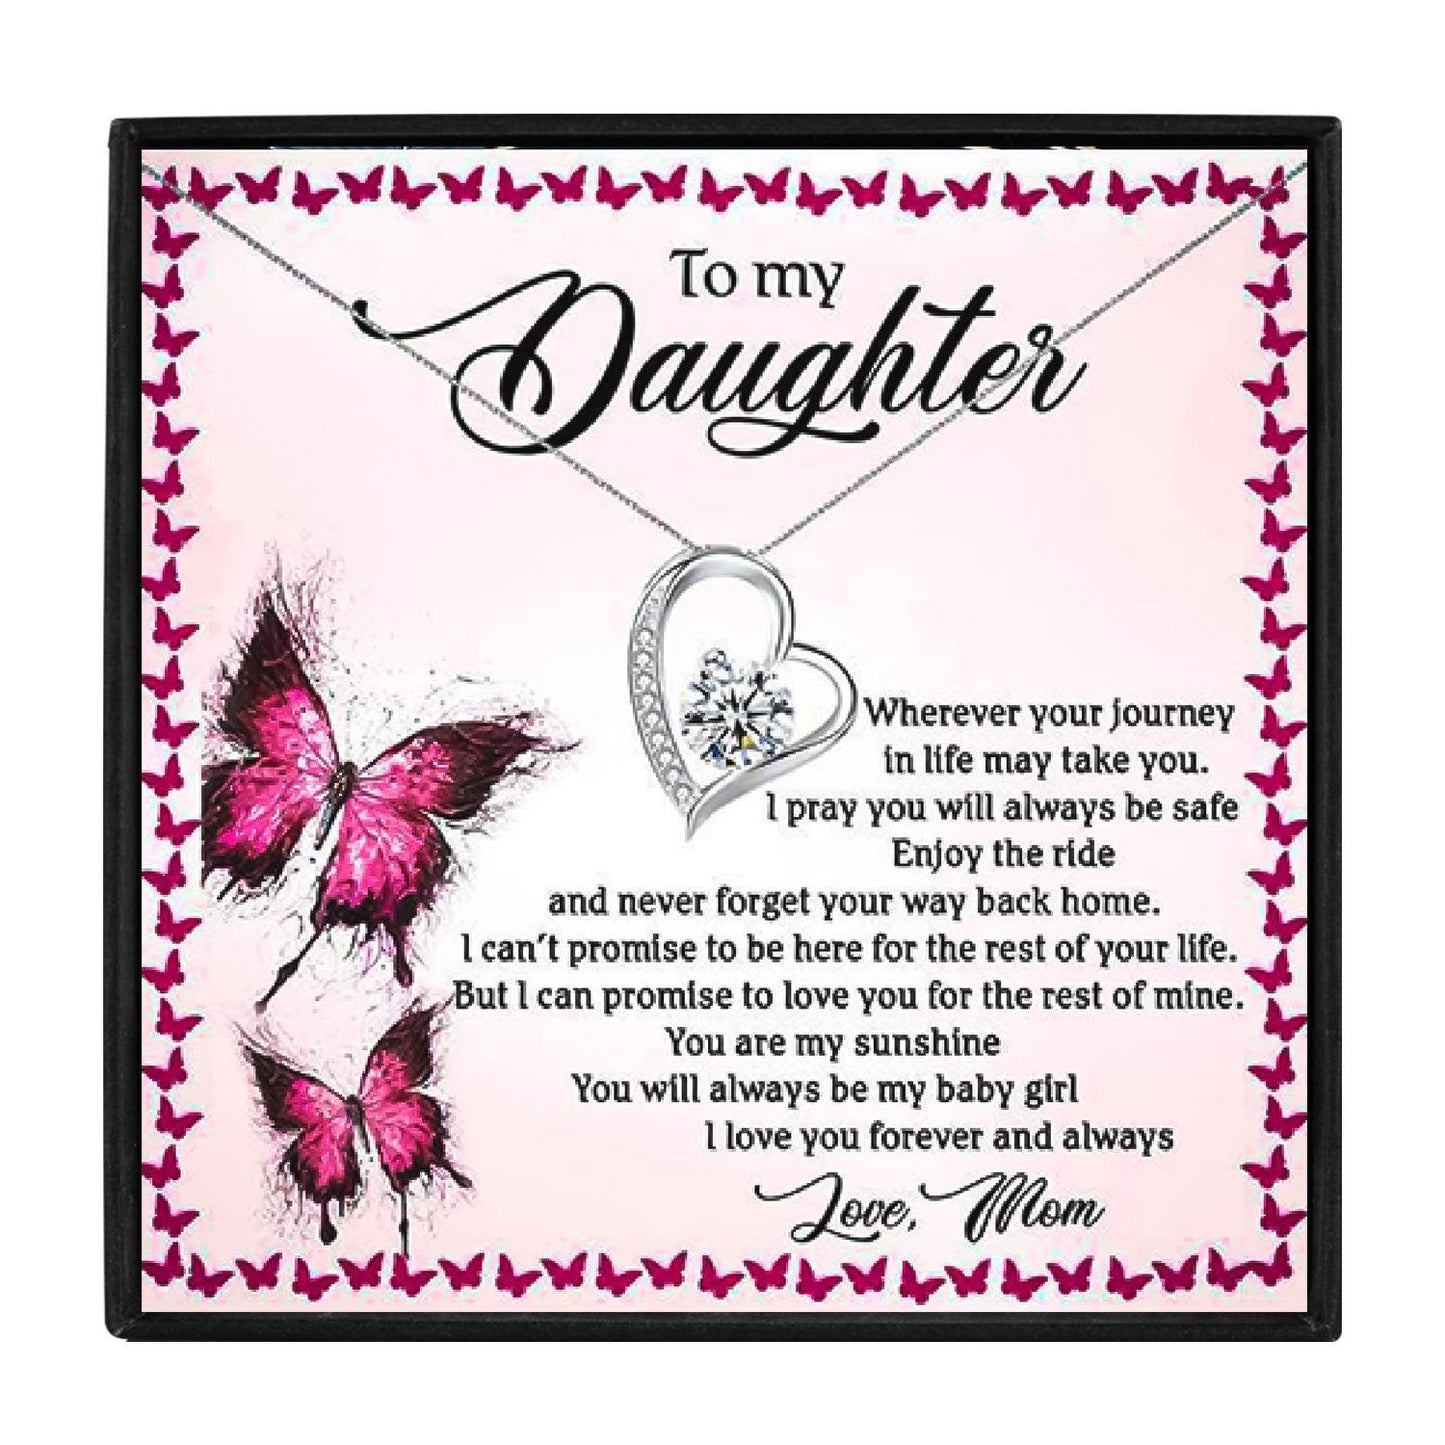 To My Daughter Necklace From Mommy for Christmas 2023 | To My Daughter Necklace From Mommy - undefined | gift, Gift Necklace, necklace, To My Daughter, To my daughter necklace, To my daughter necklace from mom | From Hunny Life | hunnylife.com